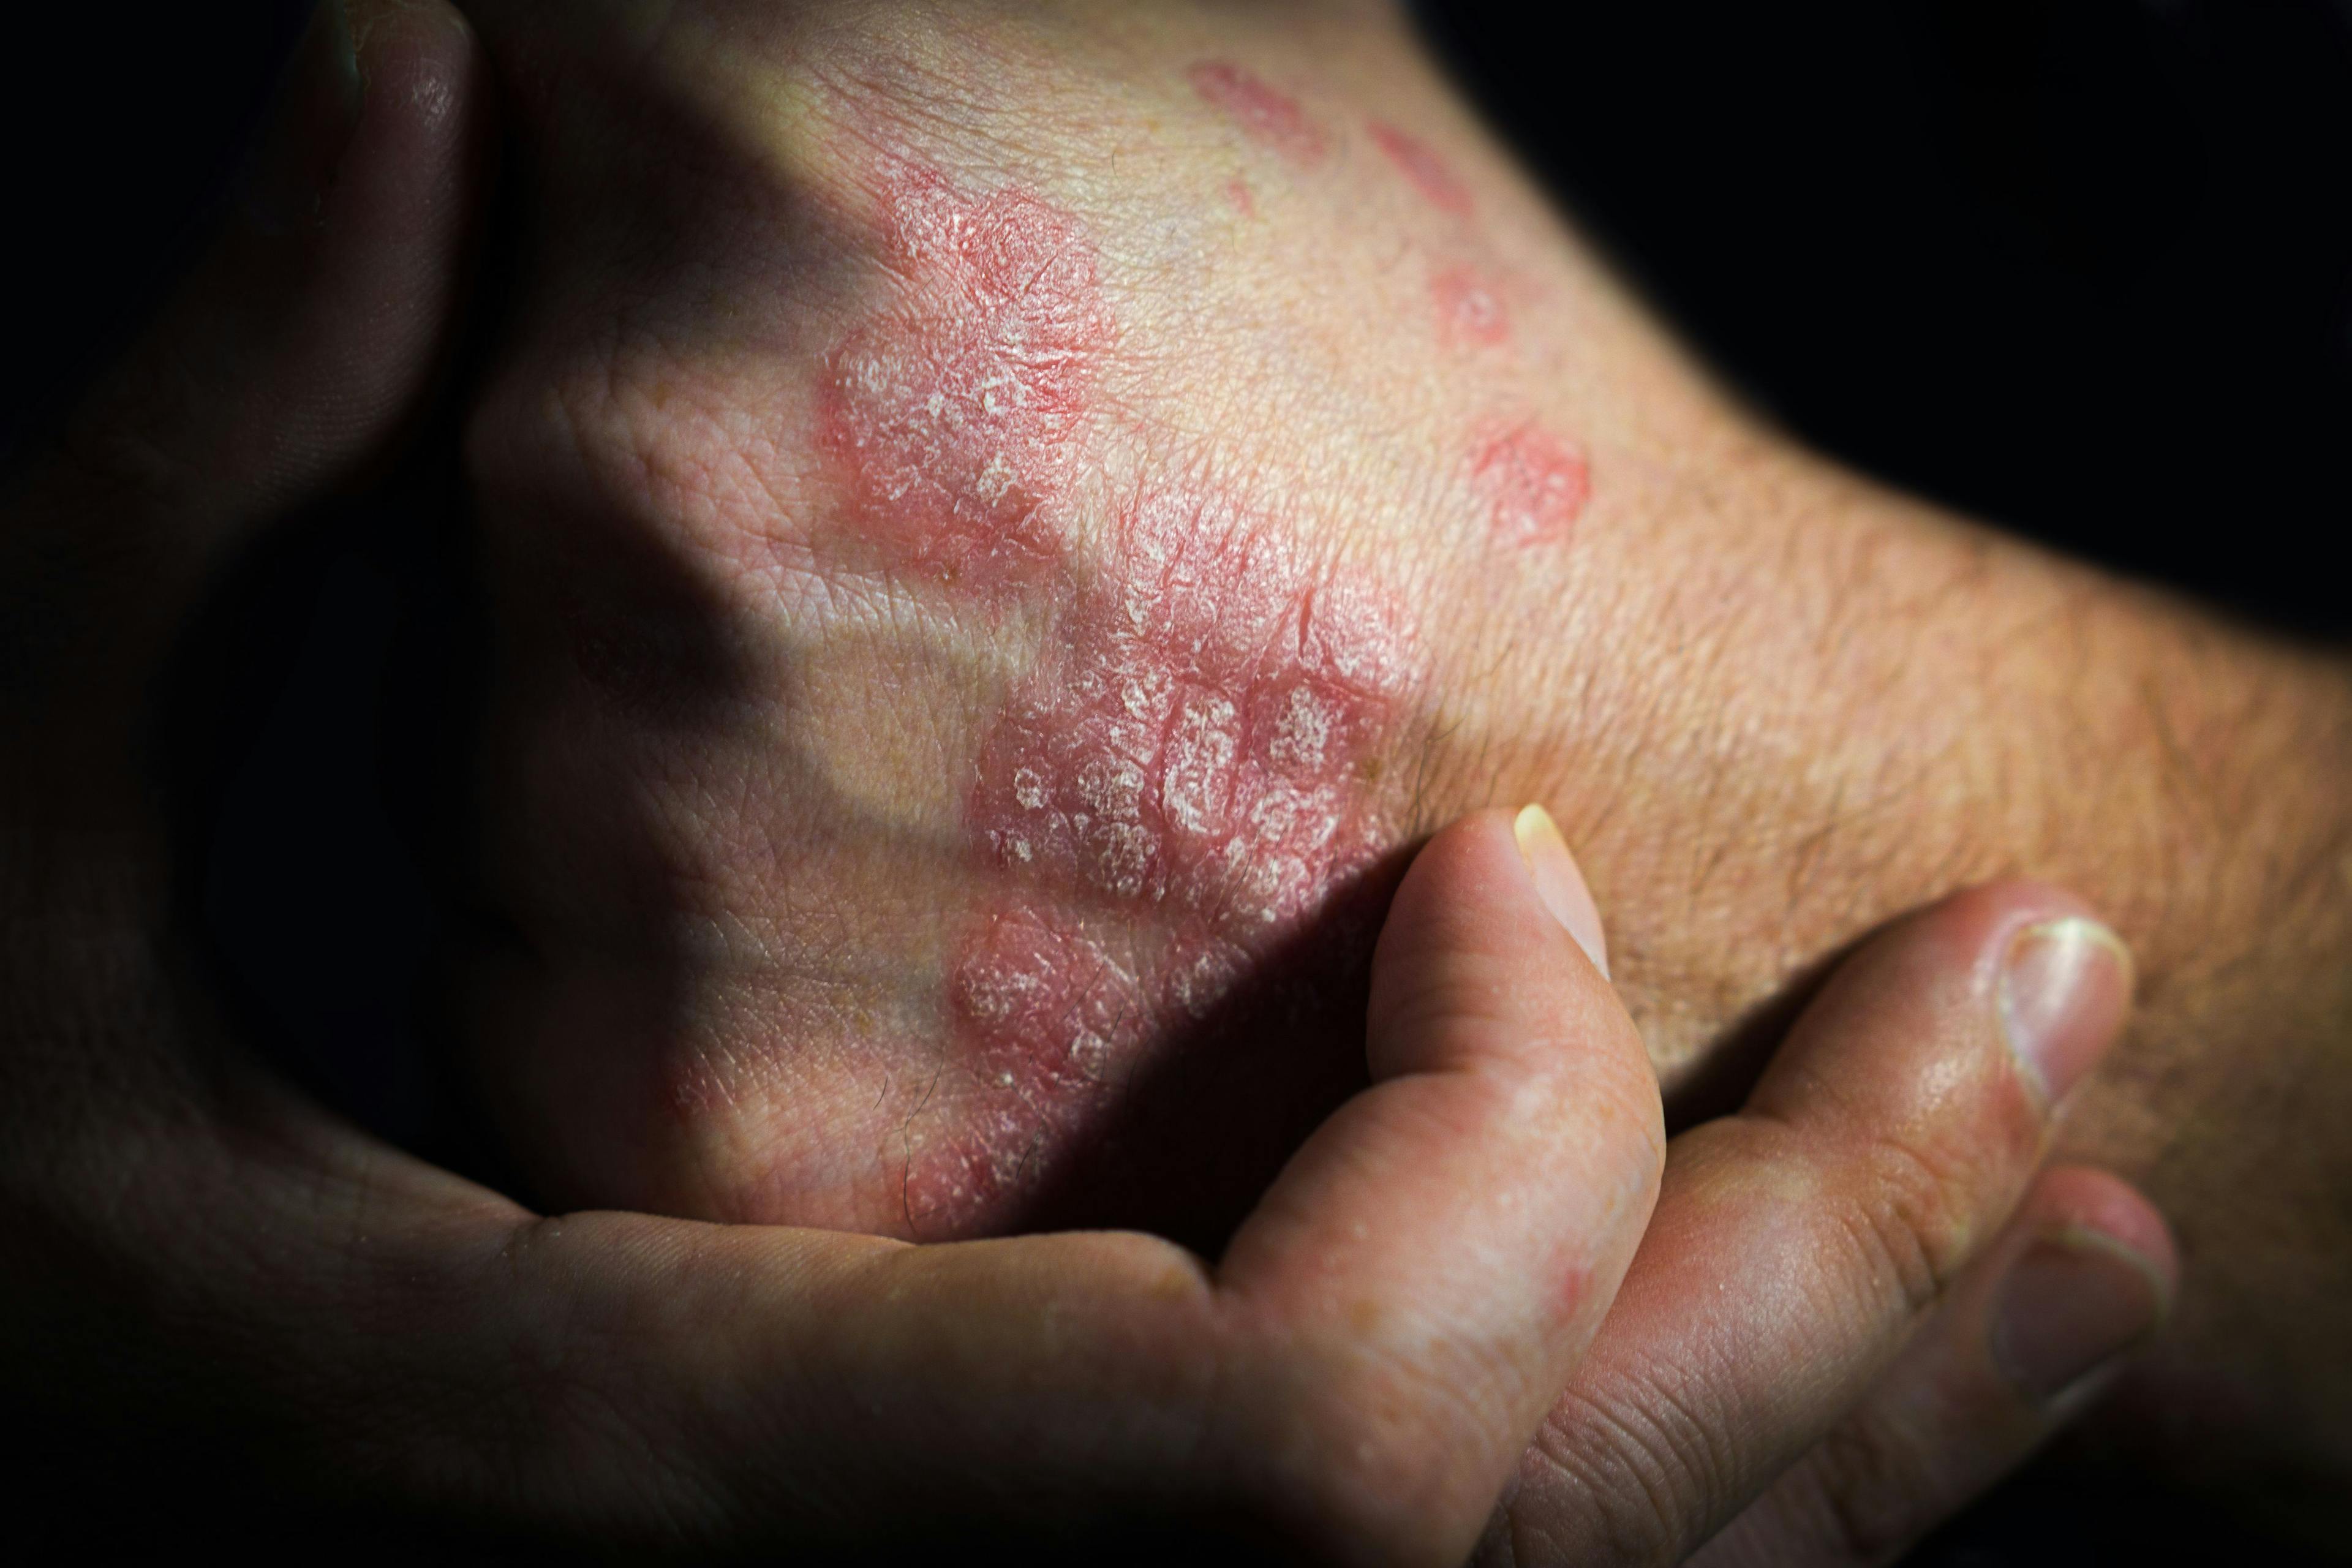 a man holds a hand at a psoriasis affected area of the skin | Image Credit SergeVo - stock.adobe.com